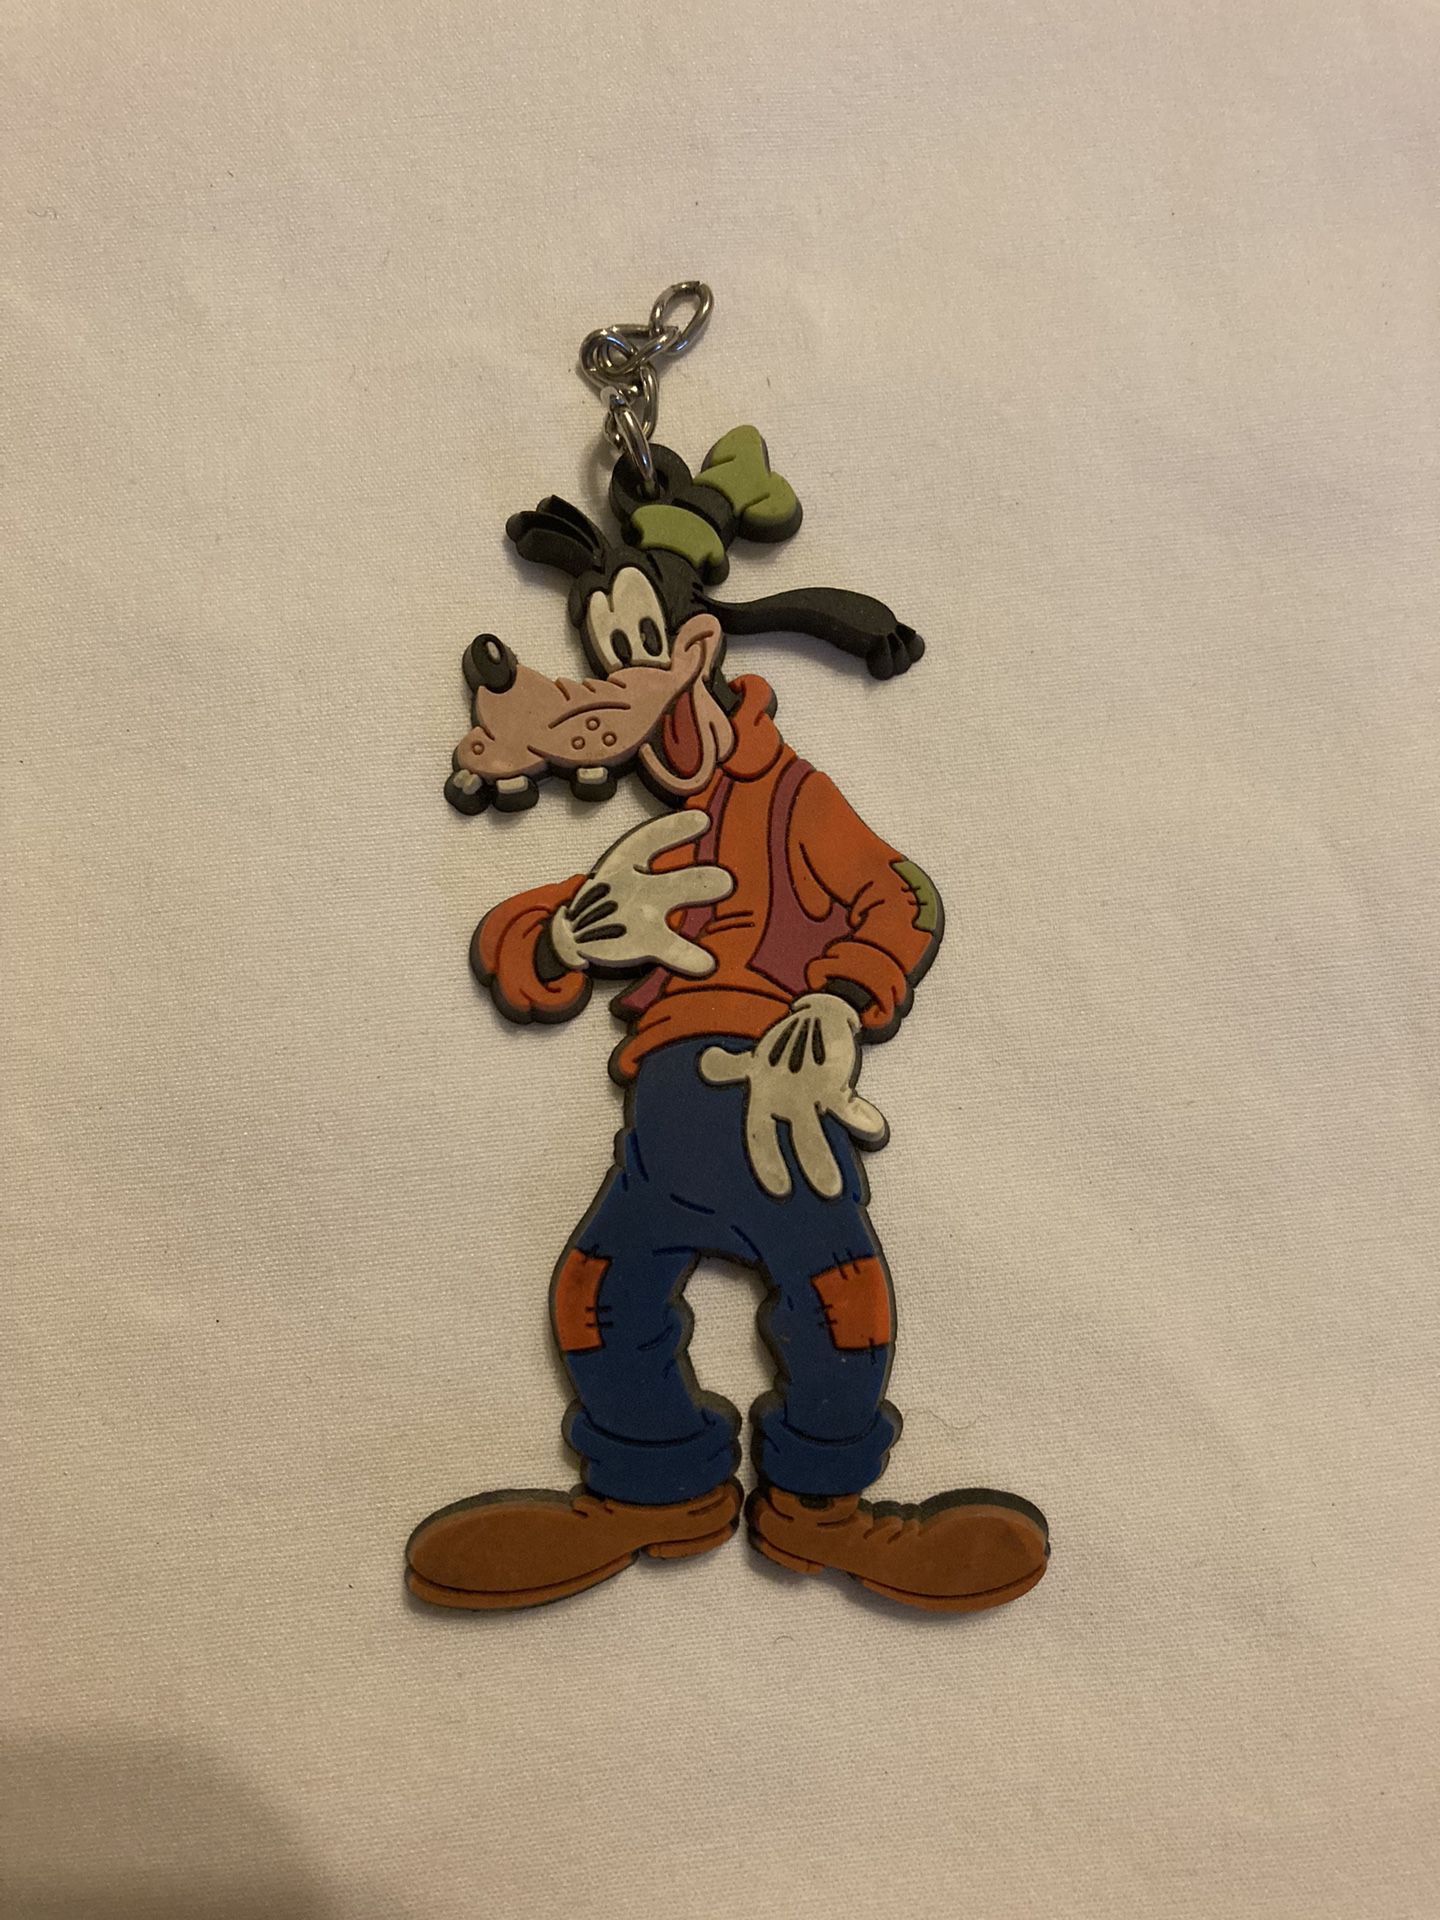 Vintage goofy Disney Mickey Mouse keychain 1980s 90s. From Disneyland park good condition 